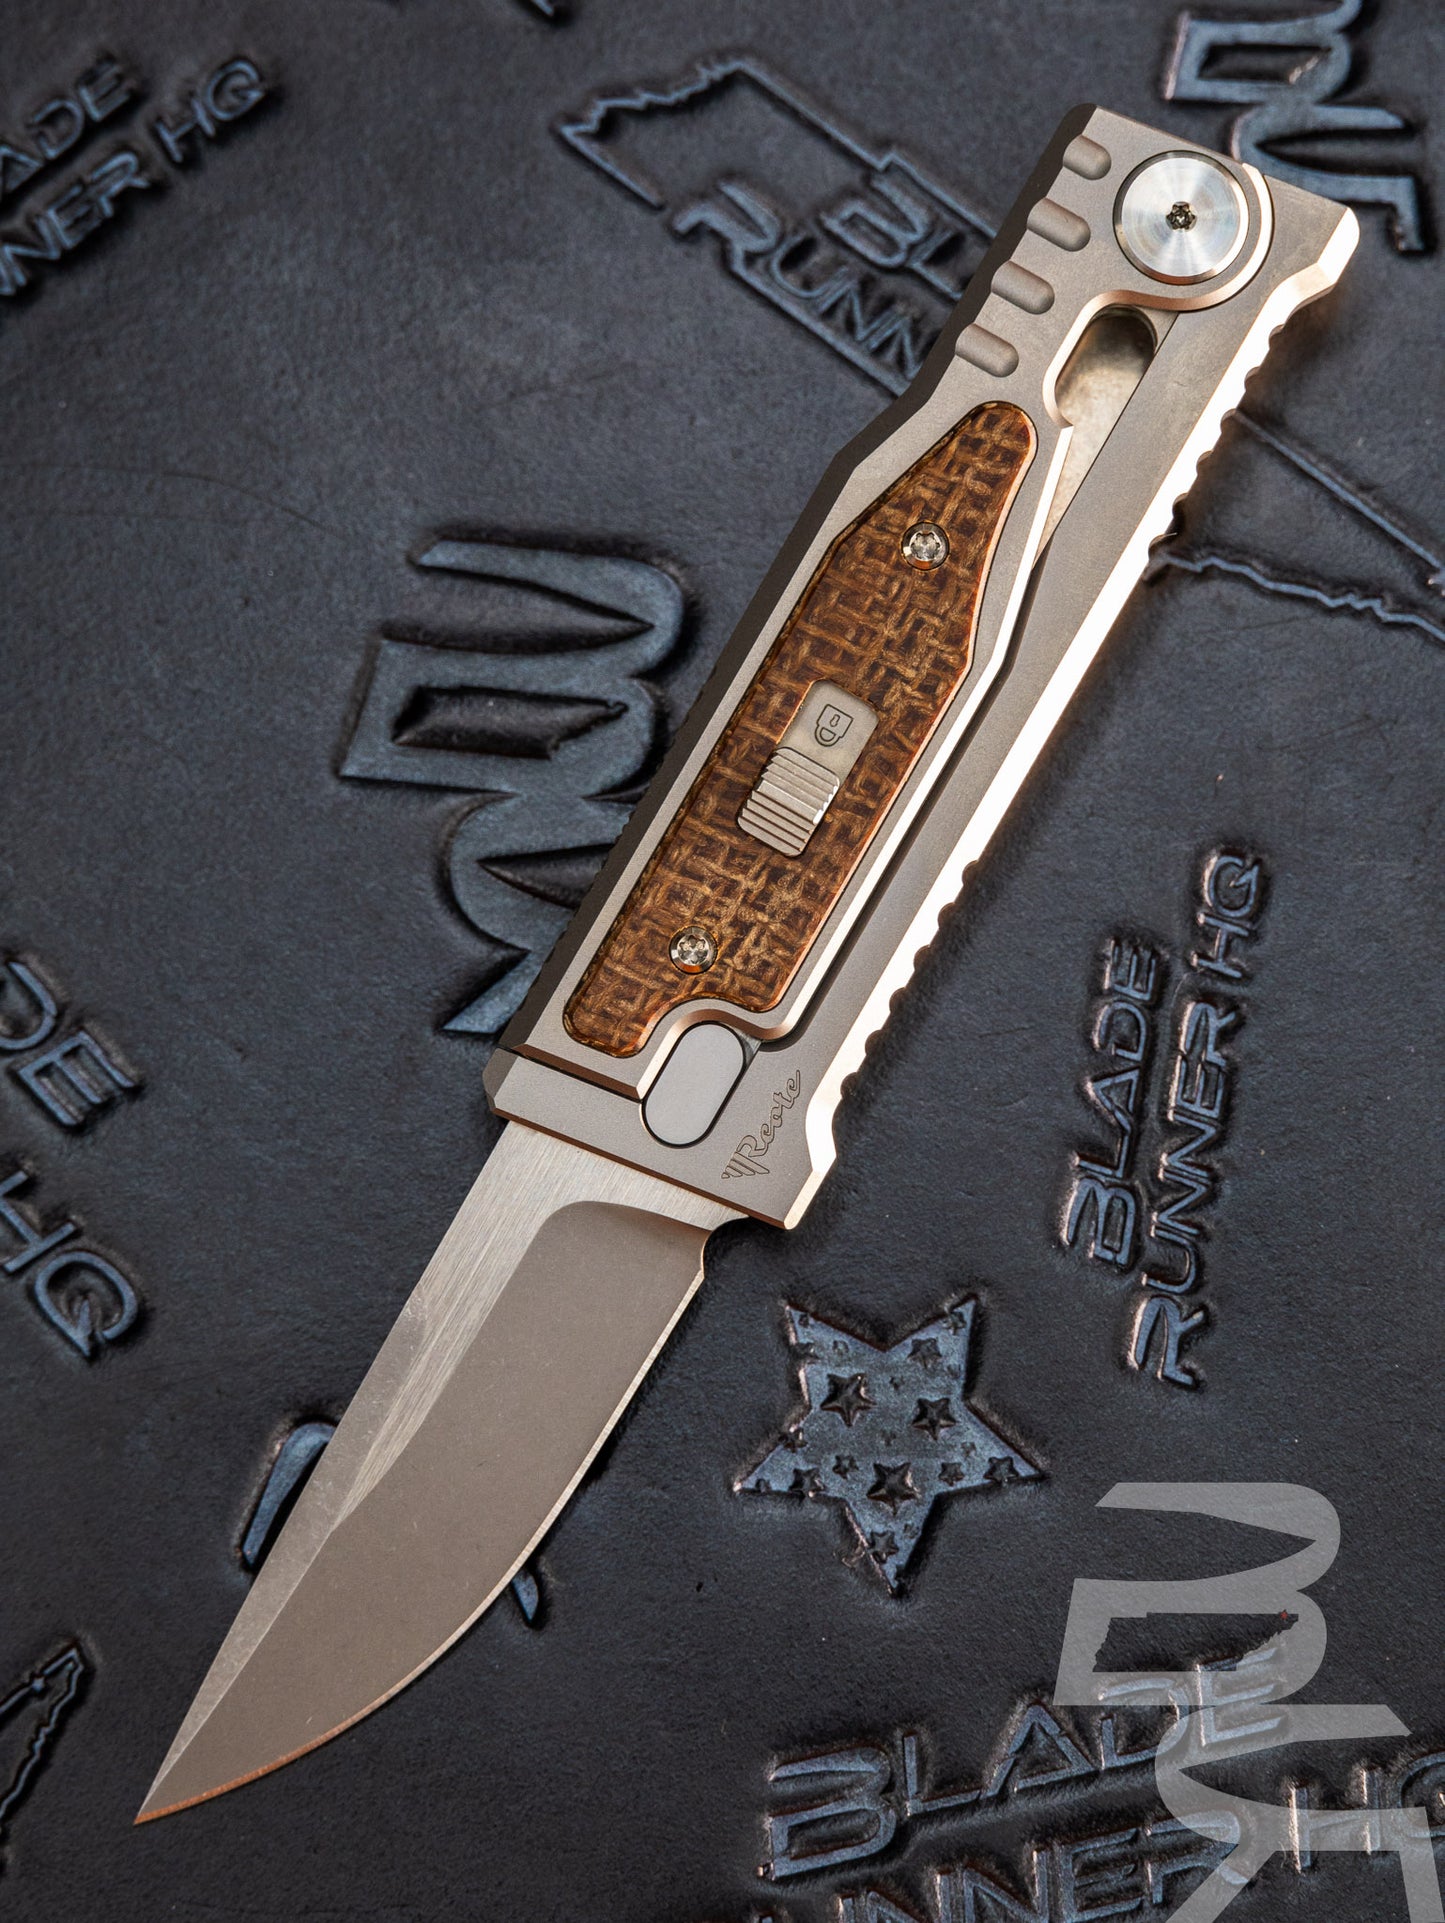 REATE EXO-MINI POCKET KNIFE BROWN MICARTA INLAY HANDLE CPM-3V DROP POINT BLADE